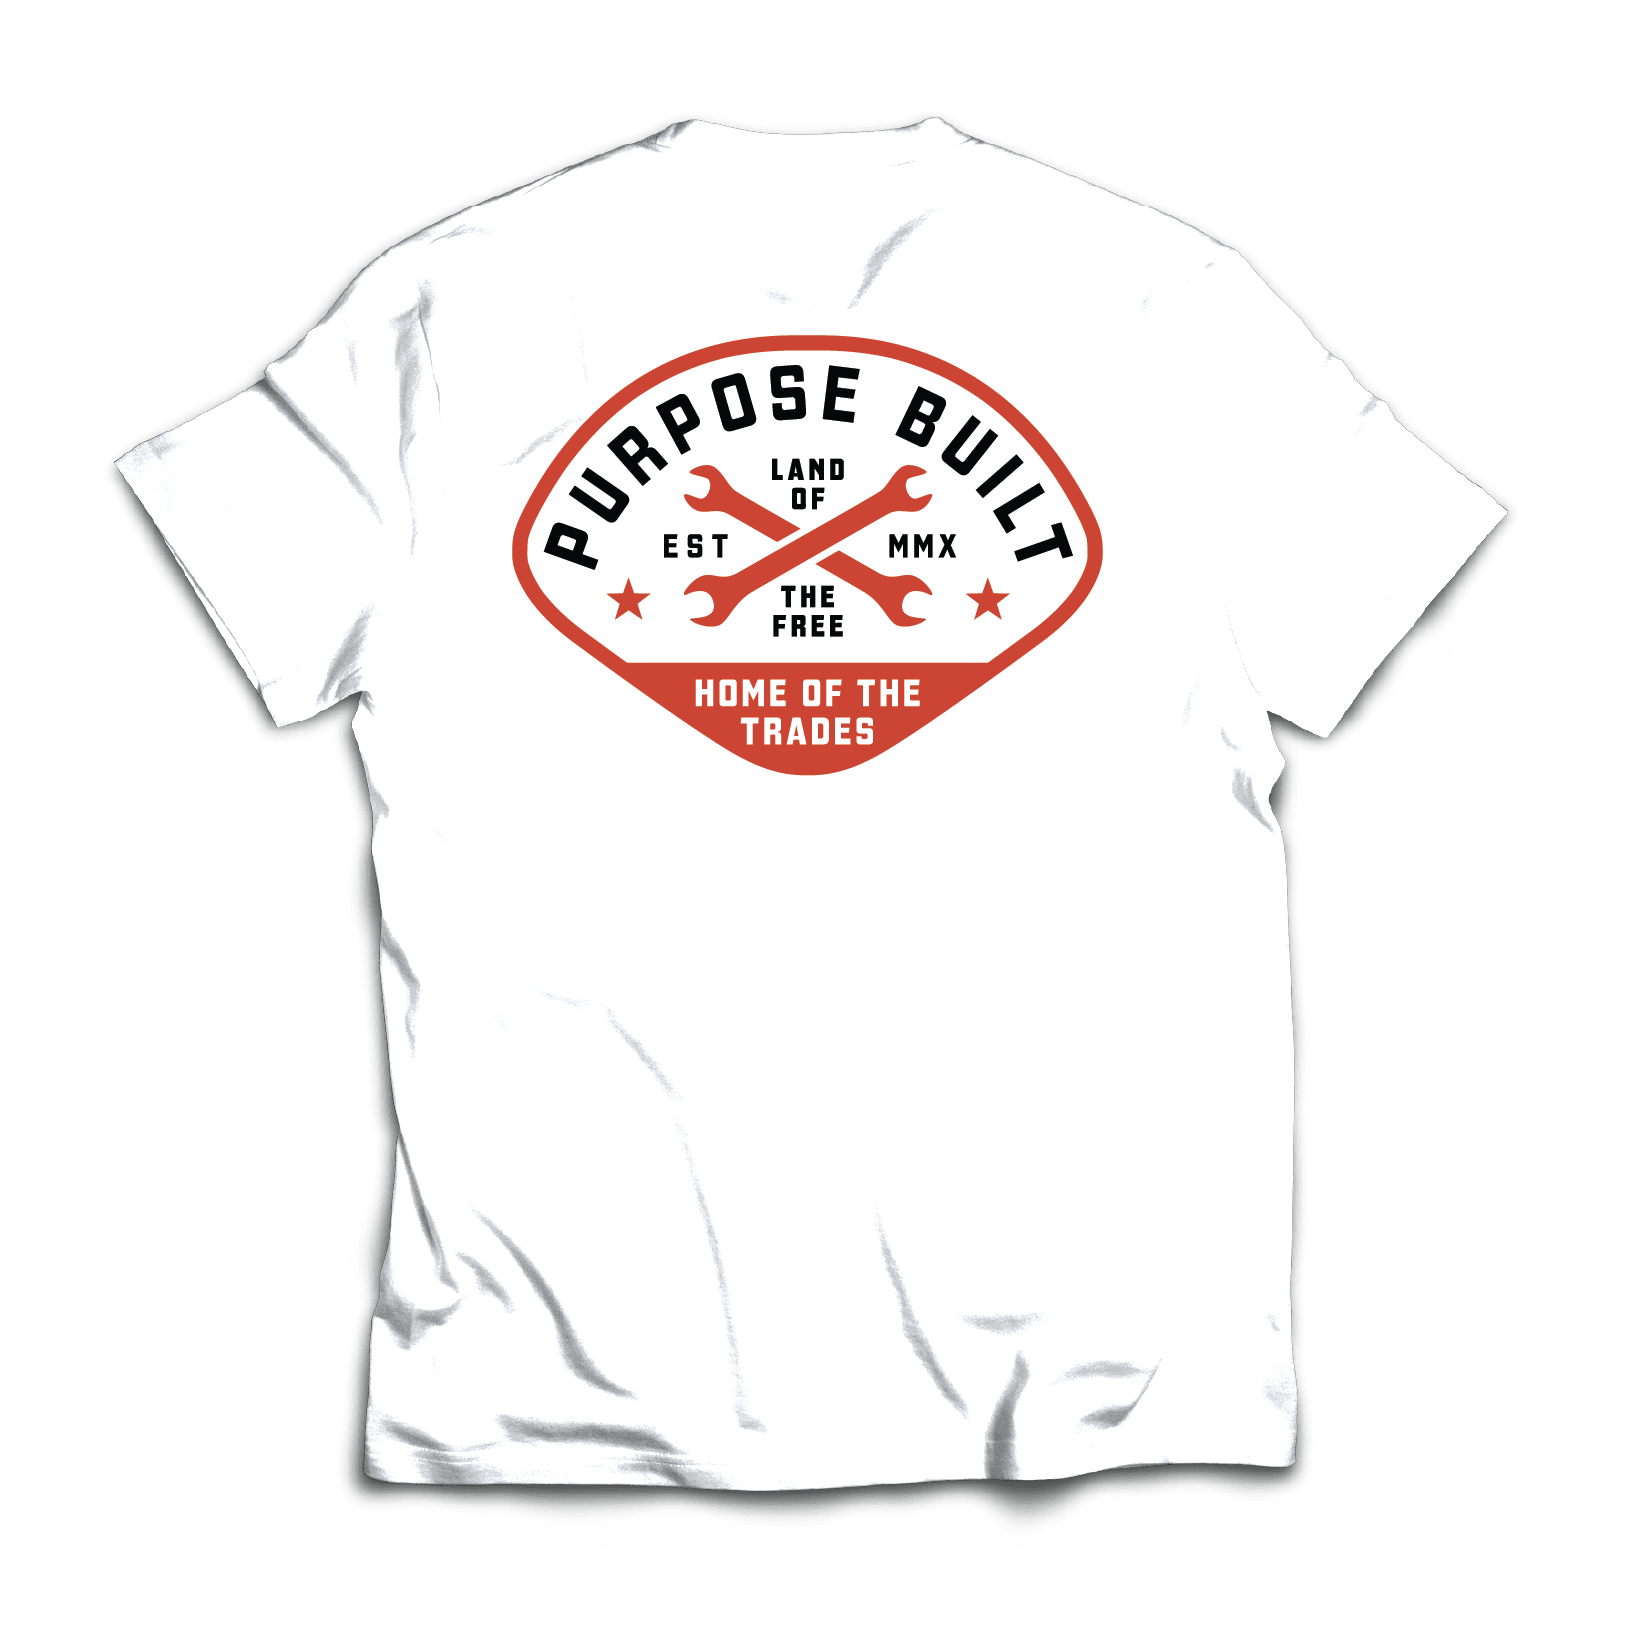 Youth Hot Wrenches Tee, White - Purpose-Built / Home of the Trades